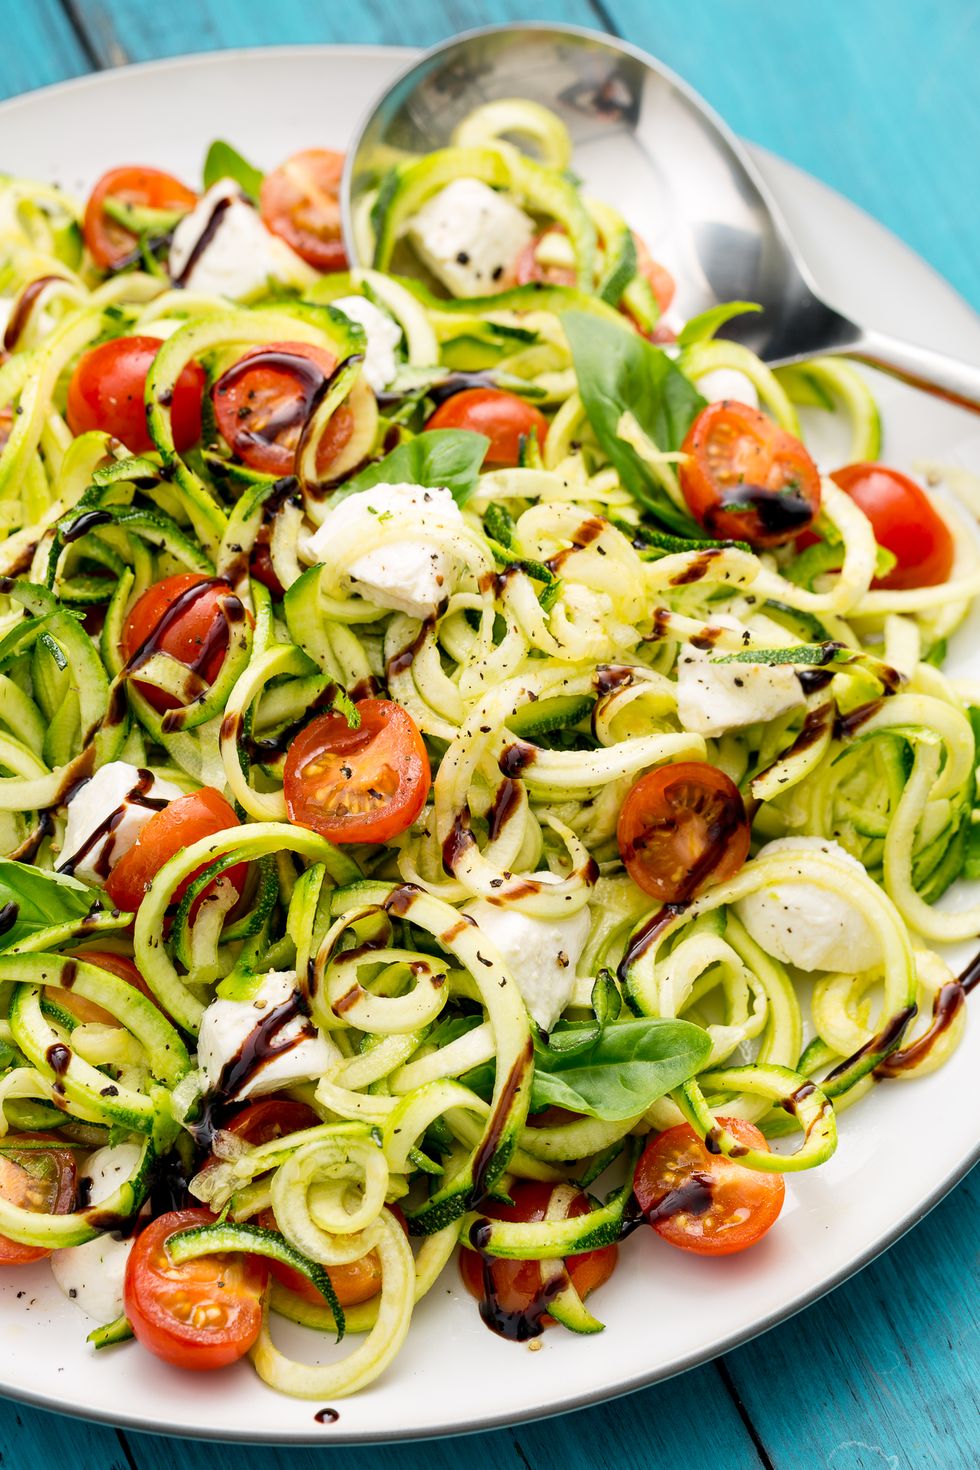 25 Easy Healthy Dinner Recipes - Caprese Zoodles﻿